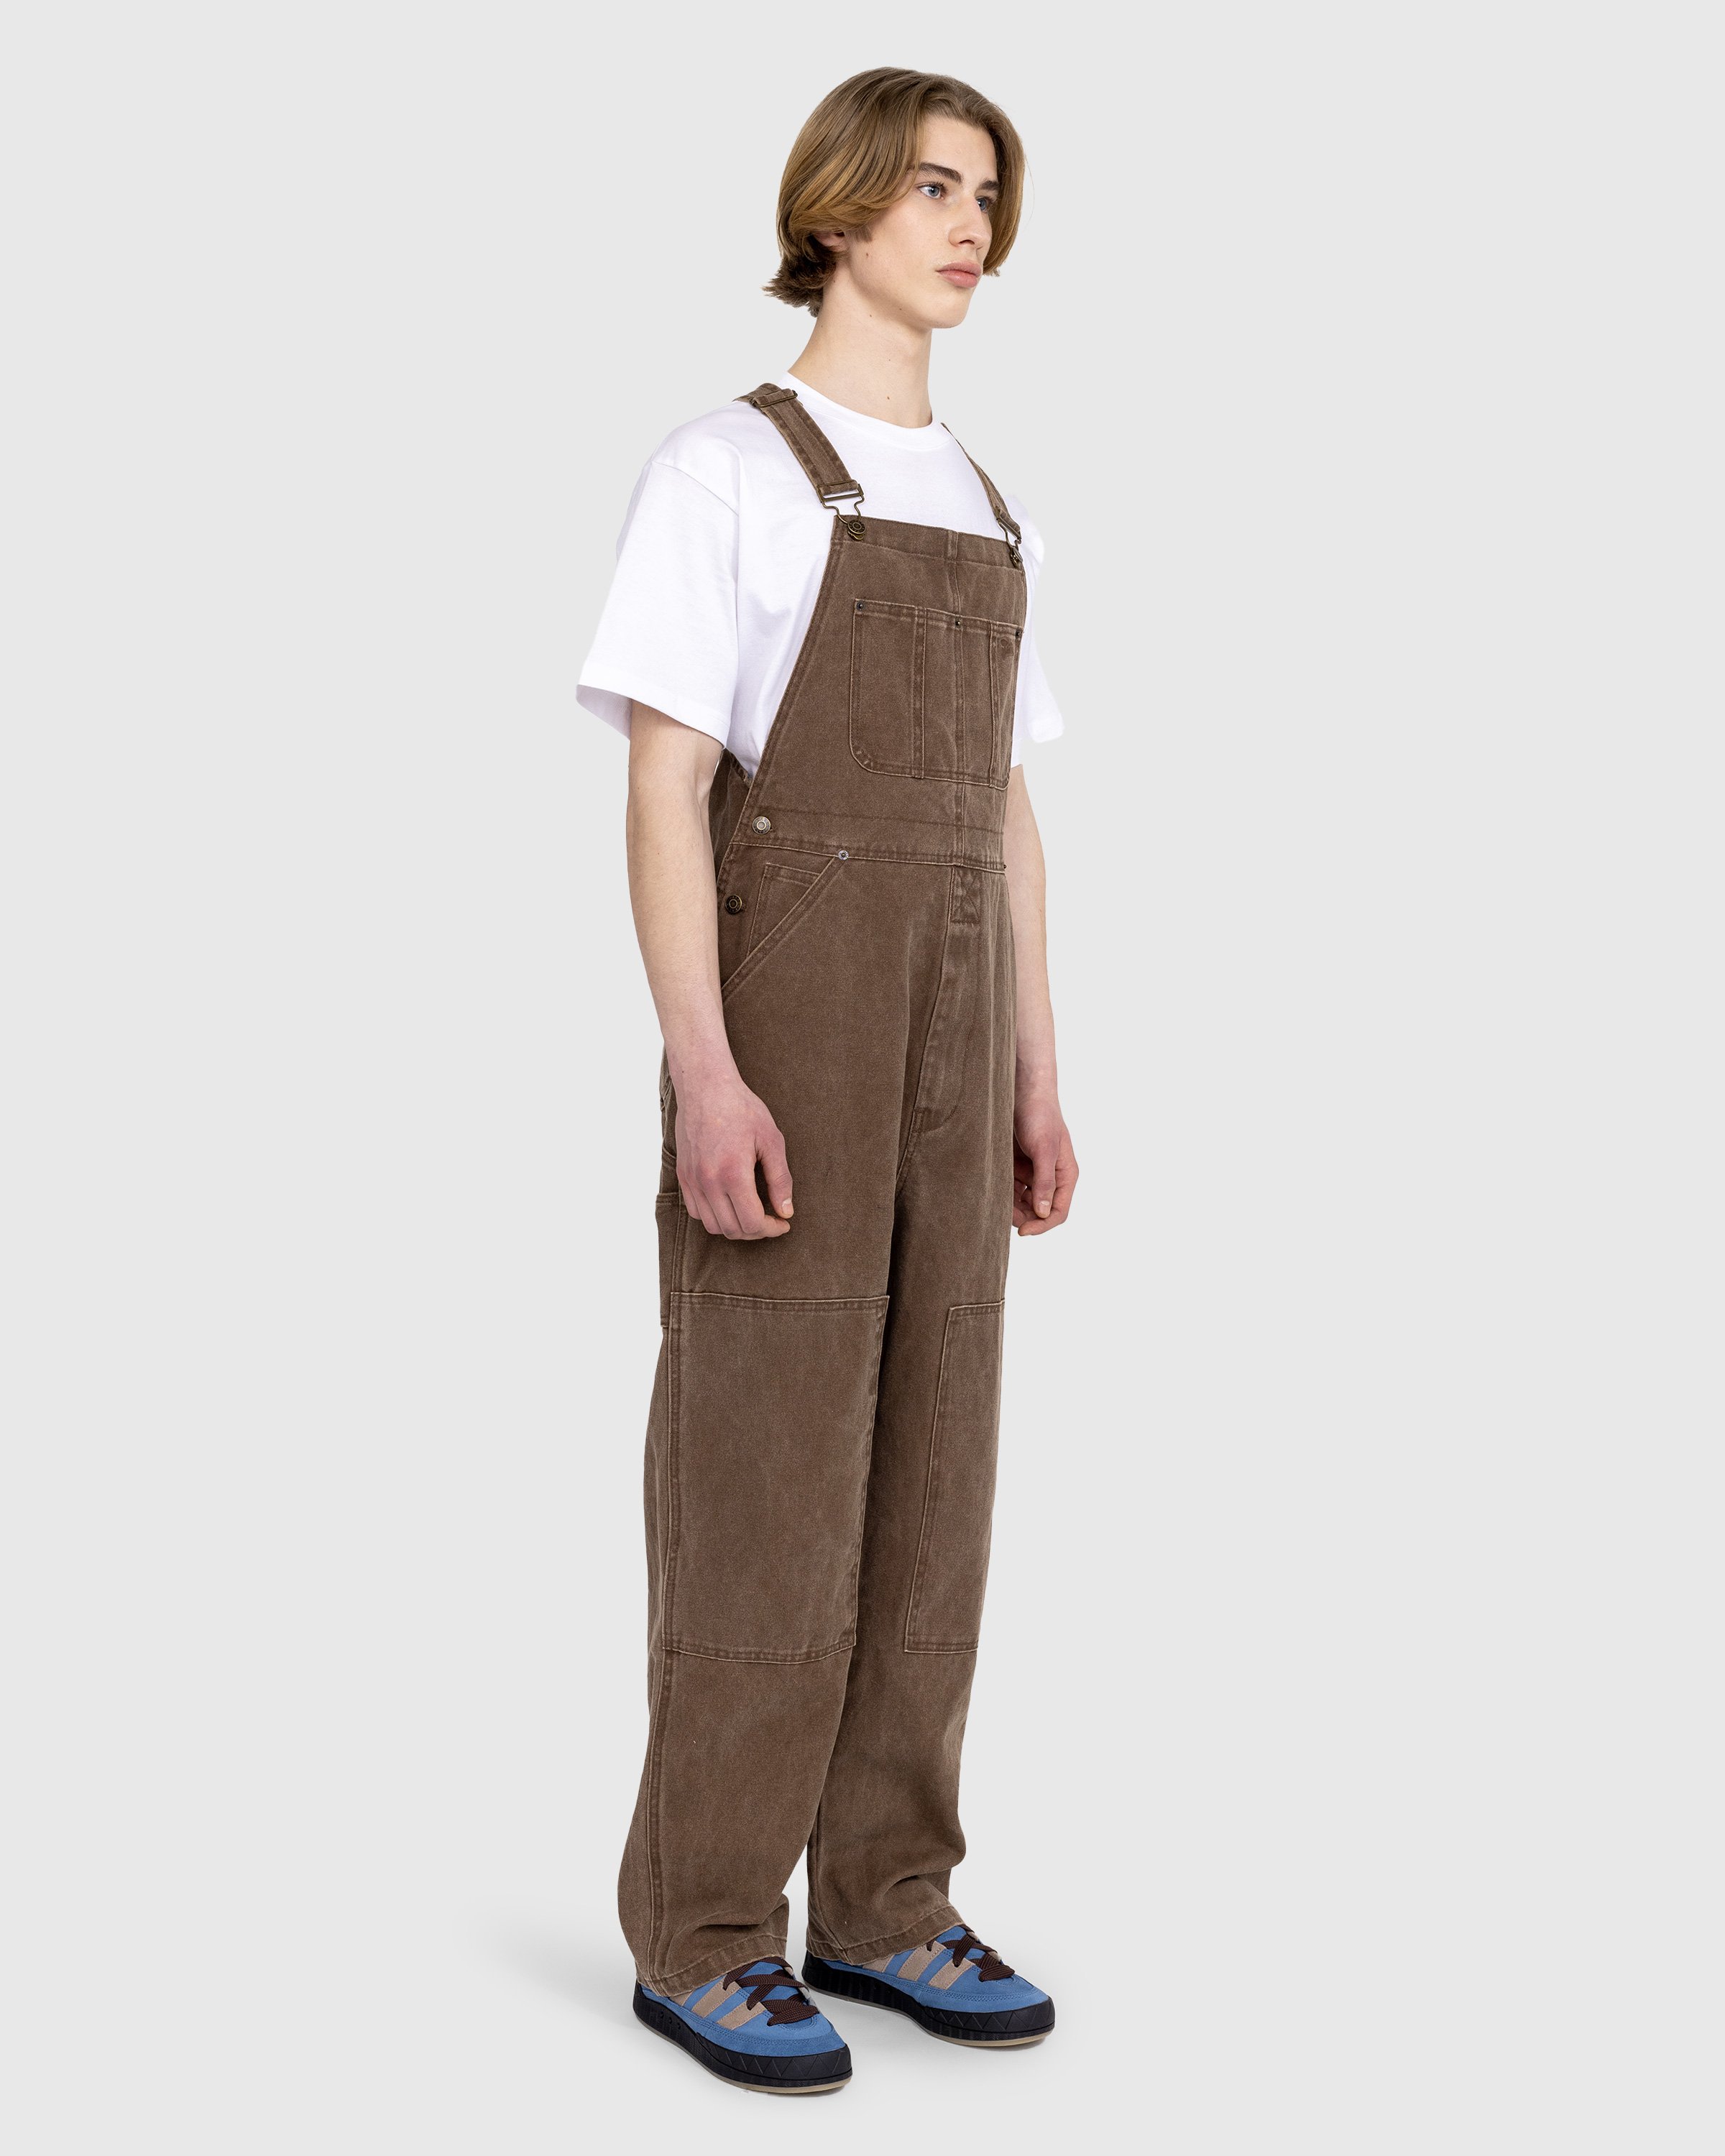 Patta - Canvas Overalls - Clothing - Brown - Image 4